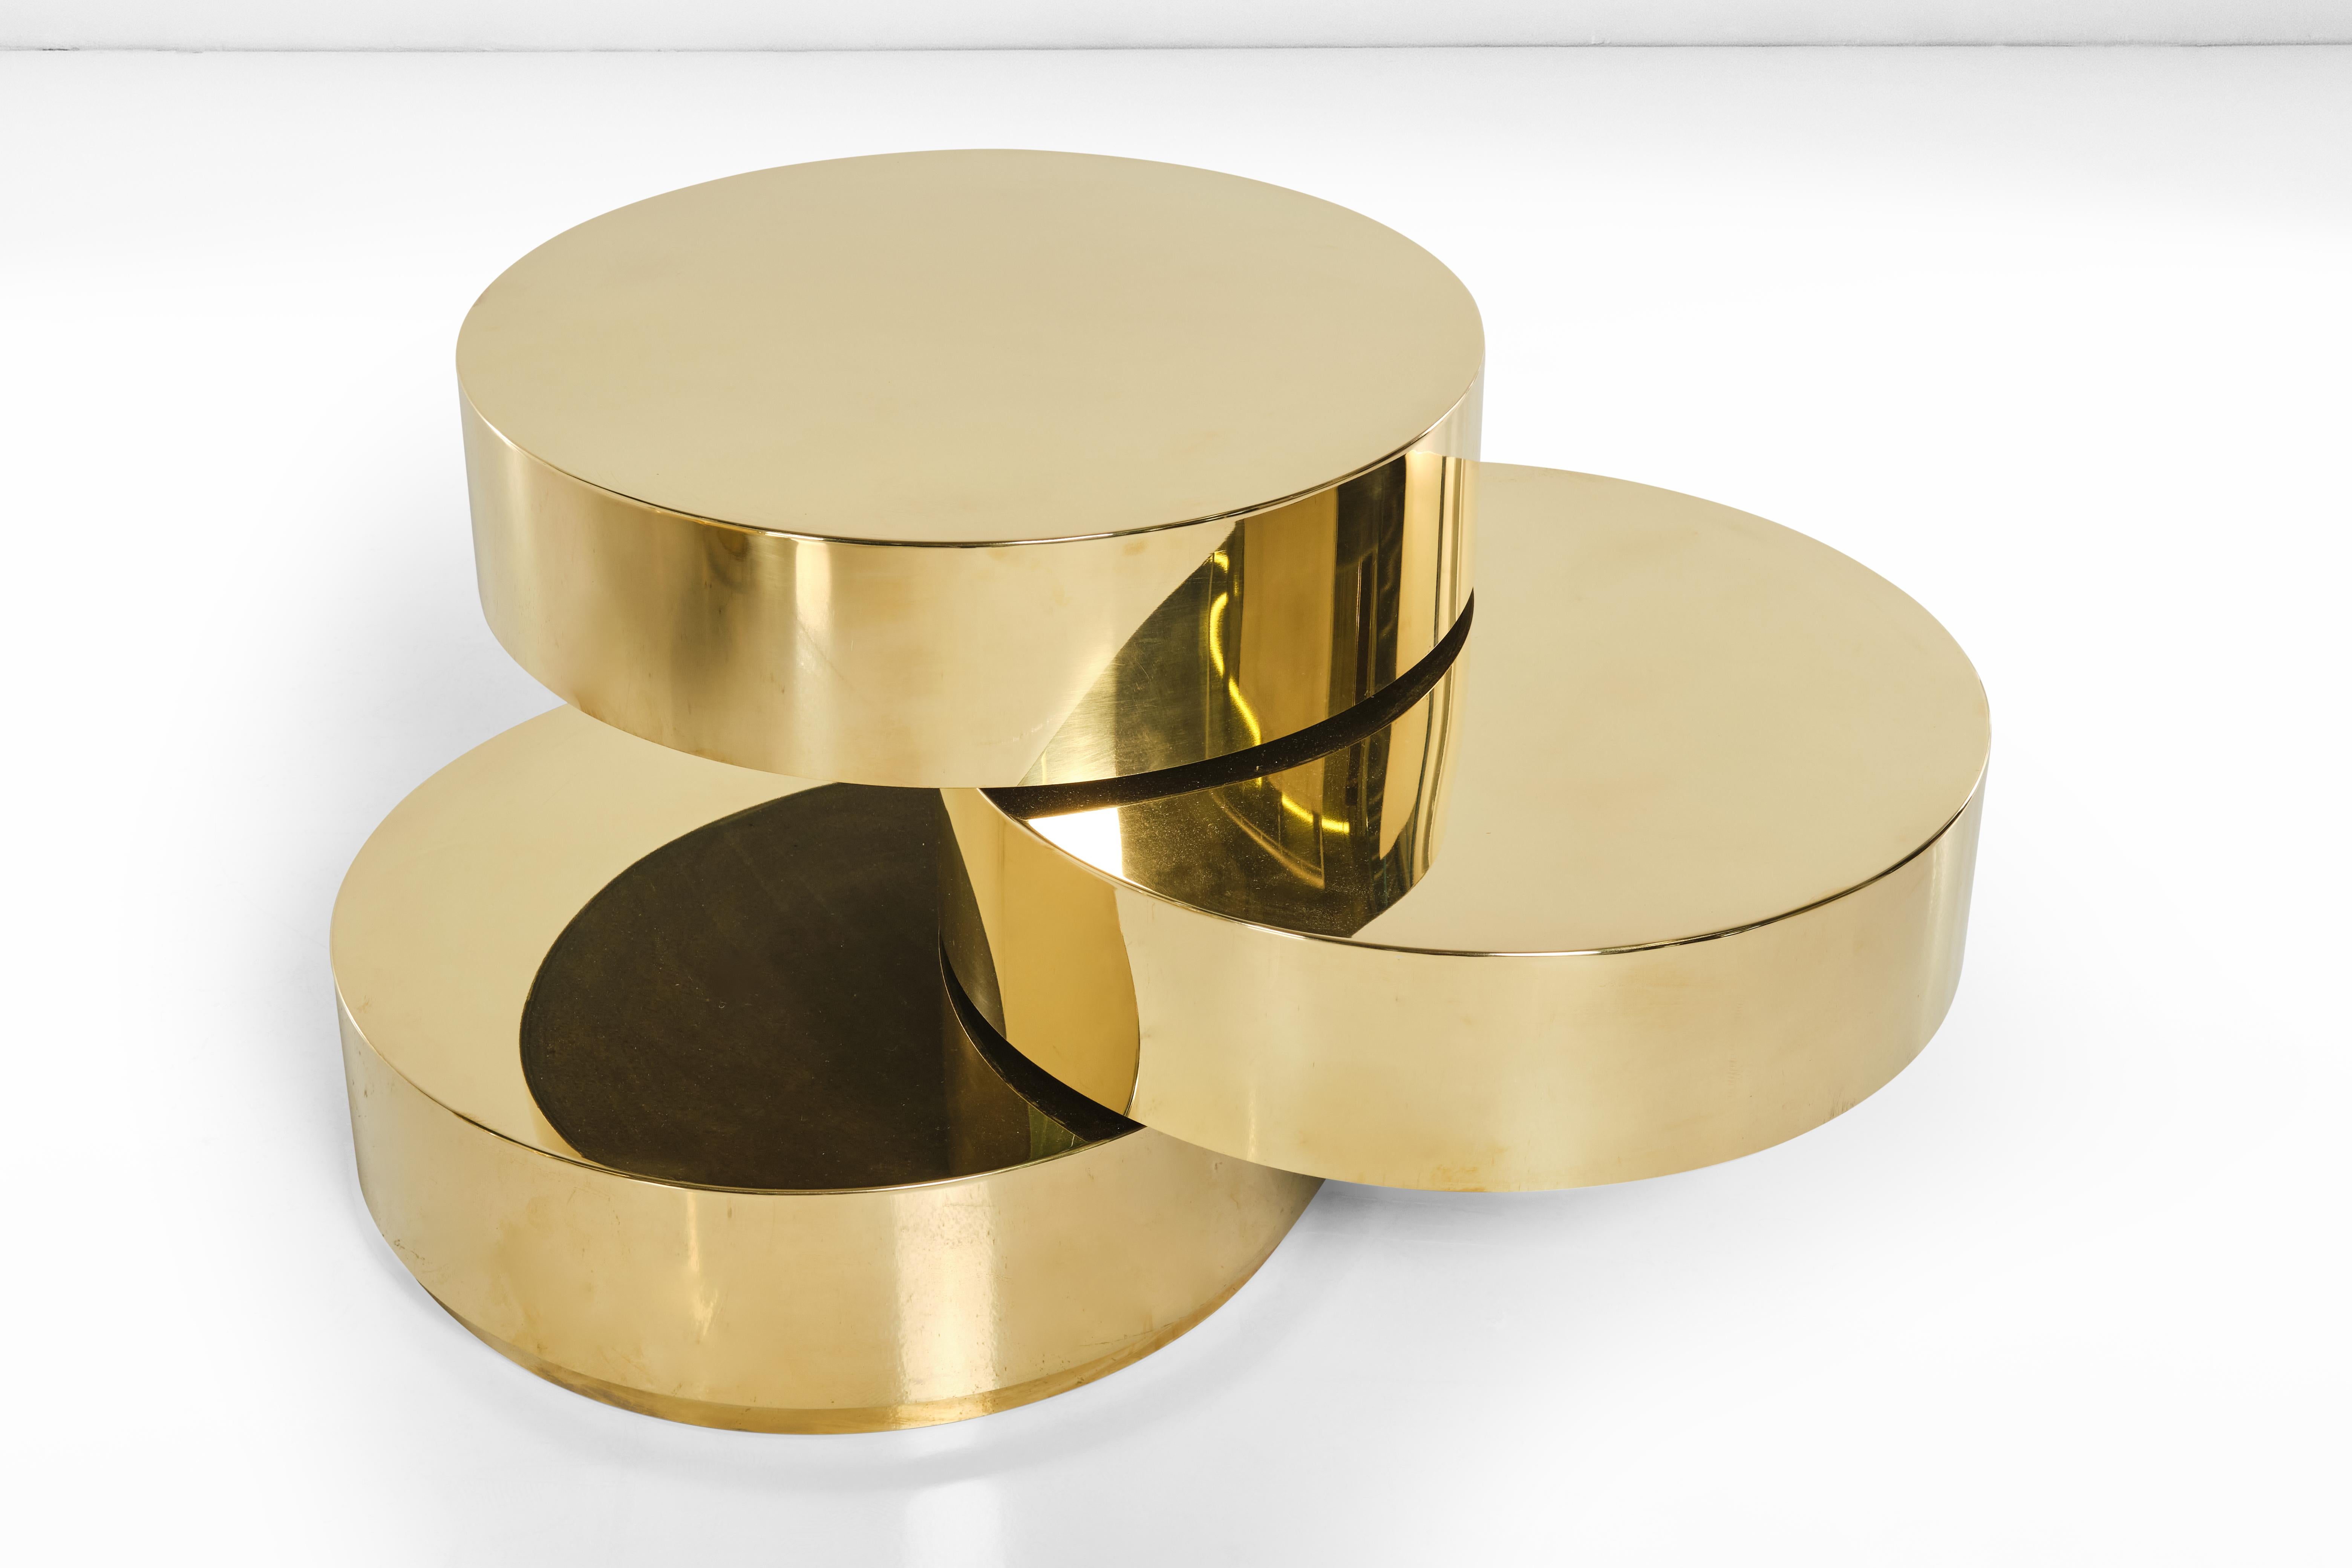 Two Stunning Brass Low Tables with Mobile Tops, Italian Design, 1980 Circa For Sale 1